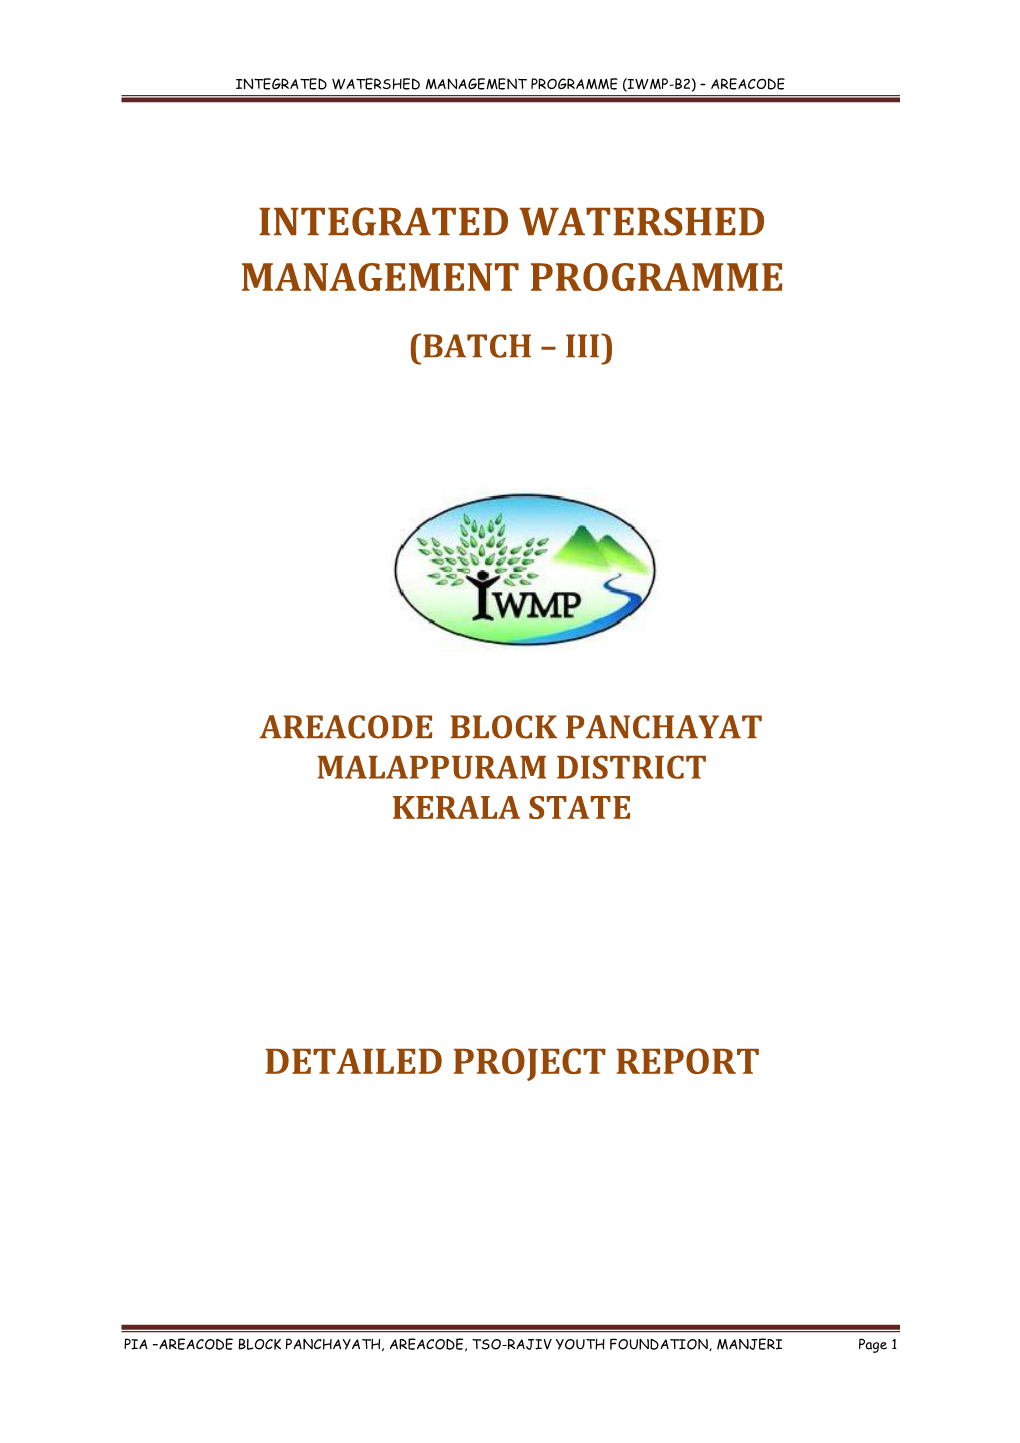 Integrated Watershed Management Programme (Iwmp-B2) – Areacode